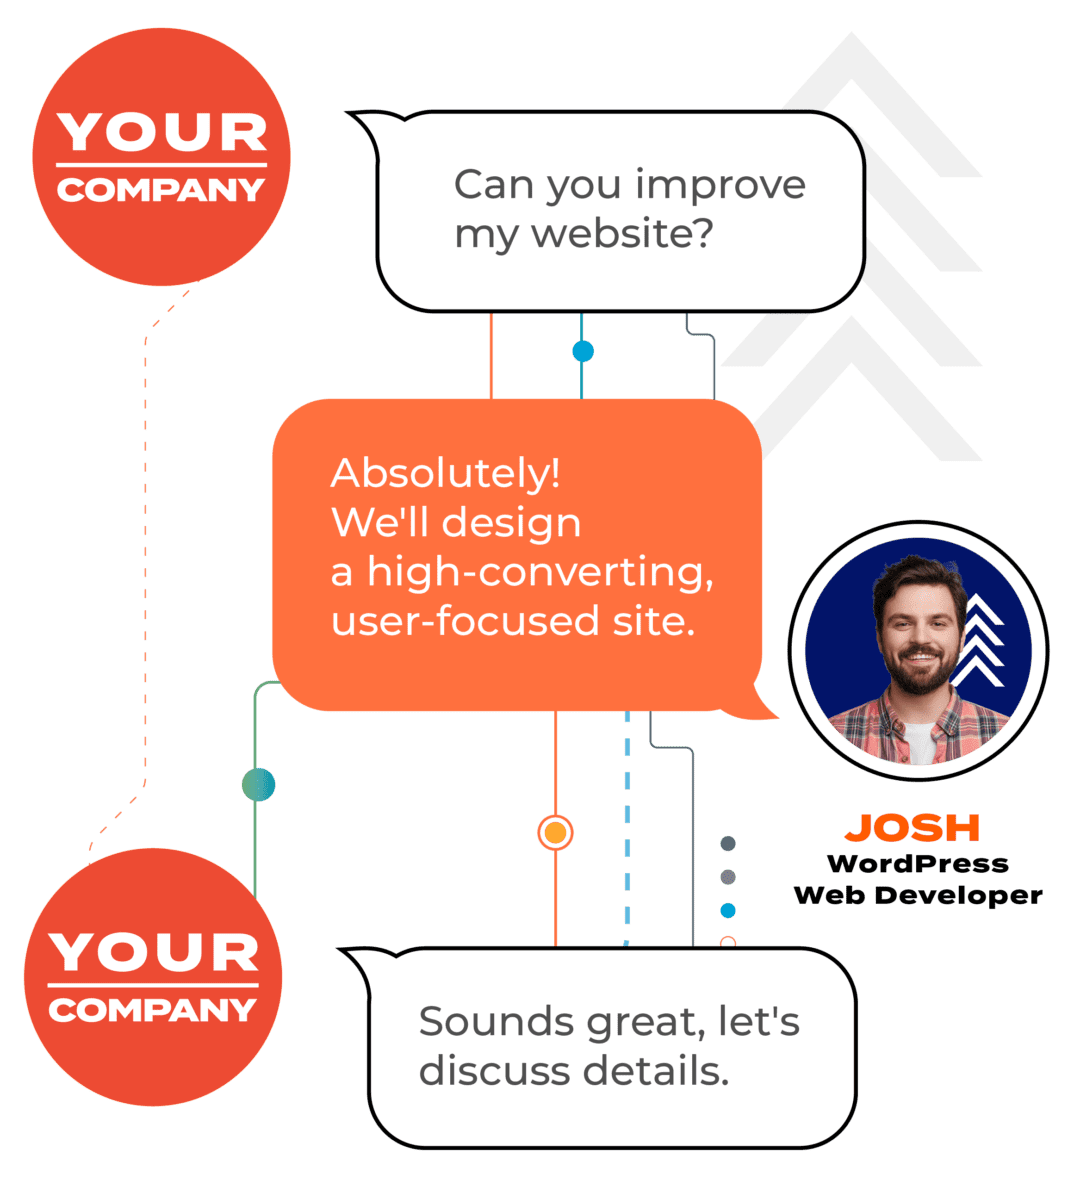 conversation about improving websites with The Automation Company